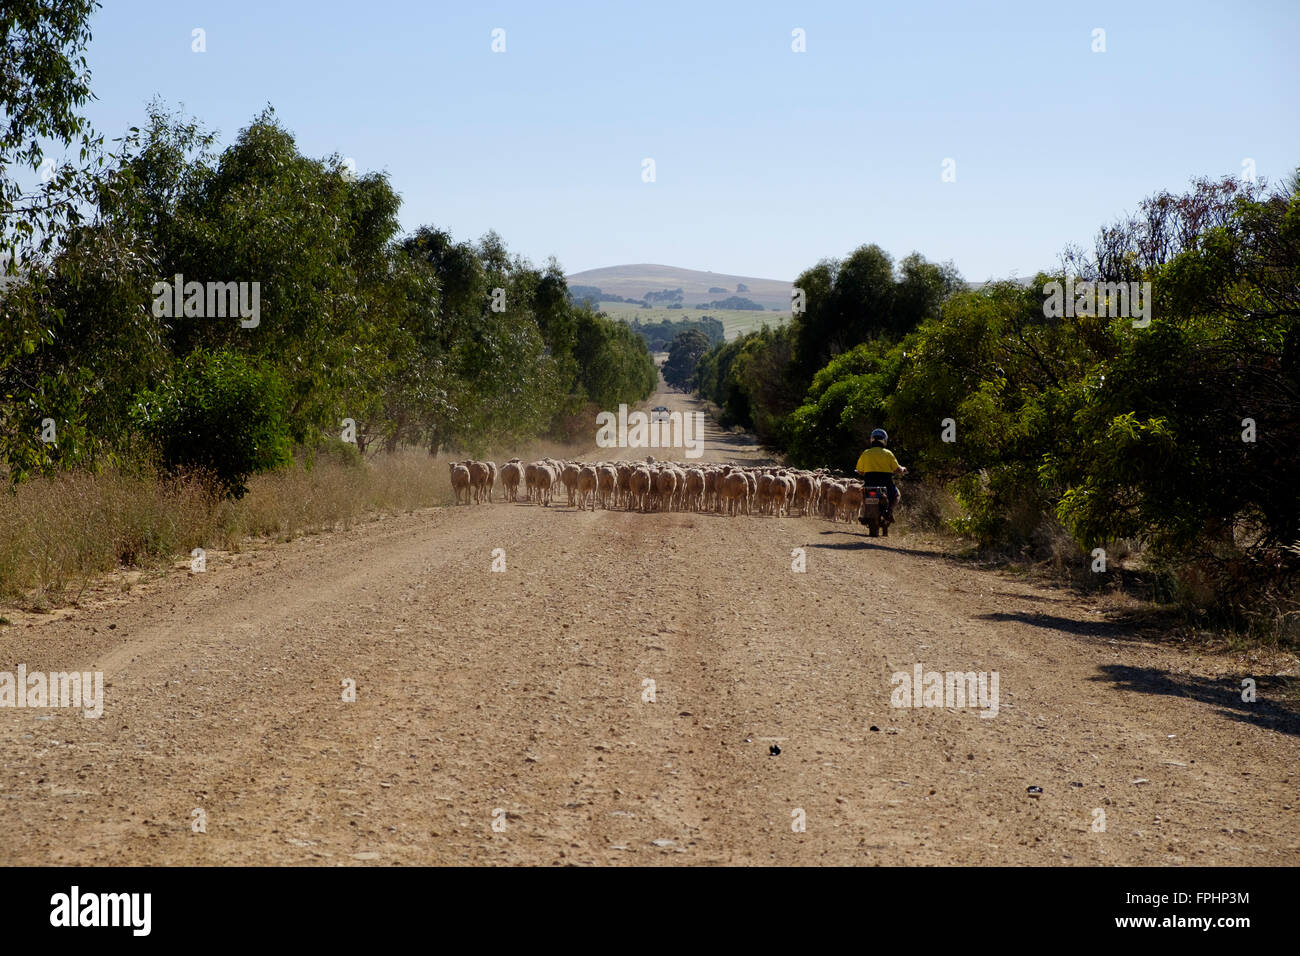 Driving the sheep - Clare Valley, South Australia Stock Photo